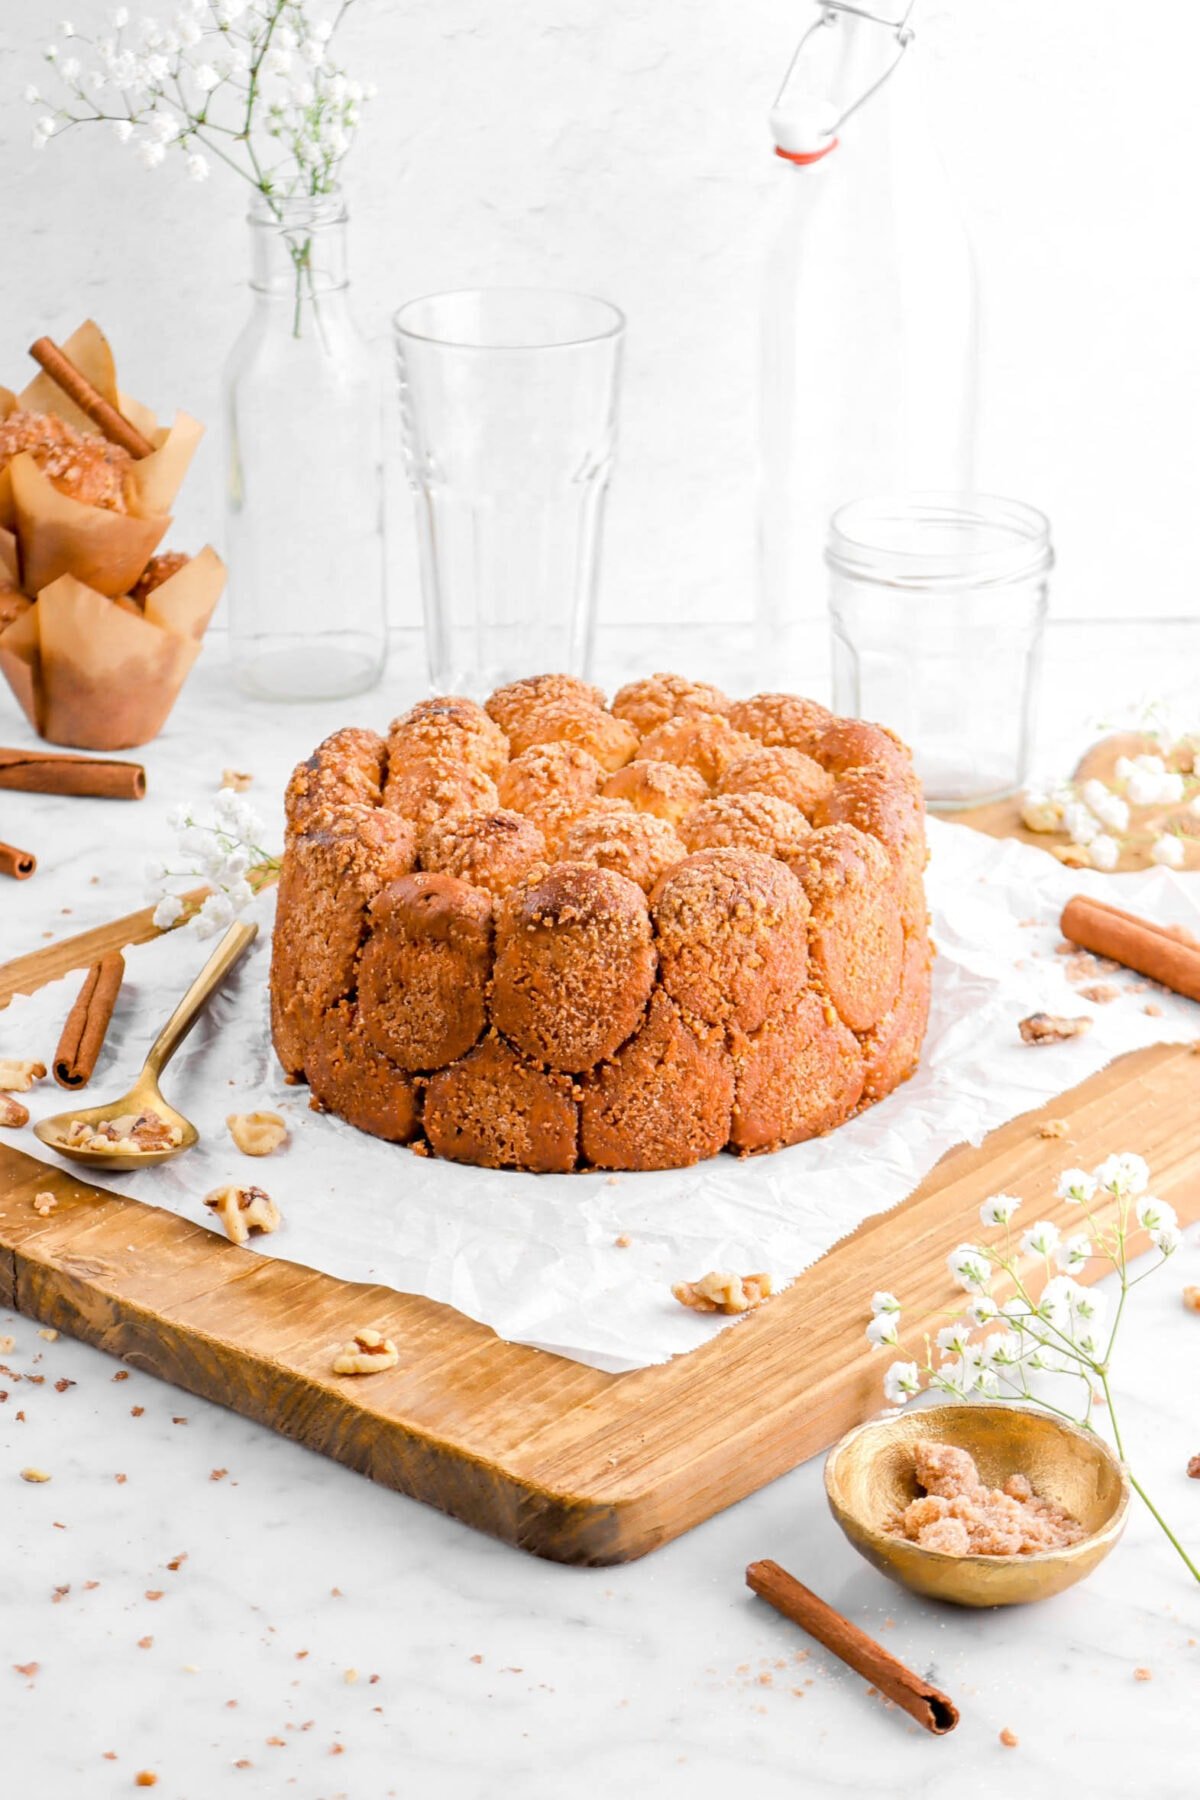 cinnamon sugar walnut pull apart bread on crumbled parchment paper on a wood board with walnuts, cinnamon sticks, a gold spoon and bowl beside, a stack of muffins, an empty glass, and flowers behind